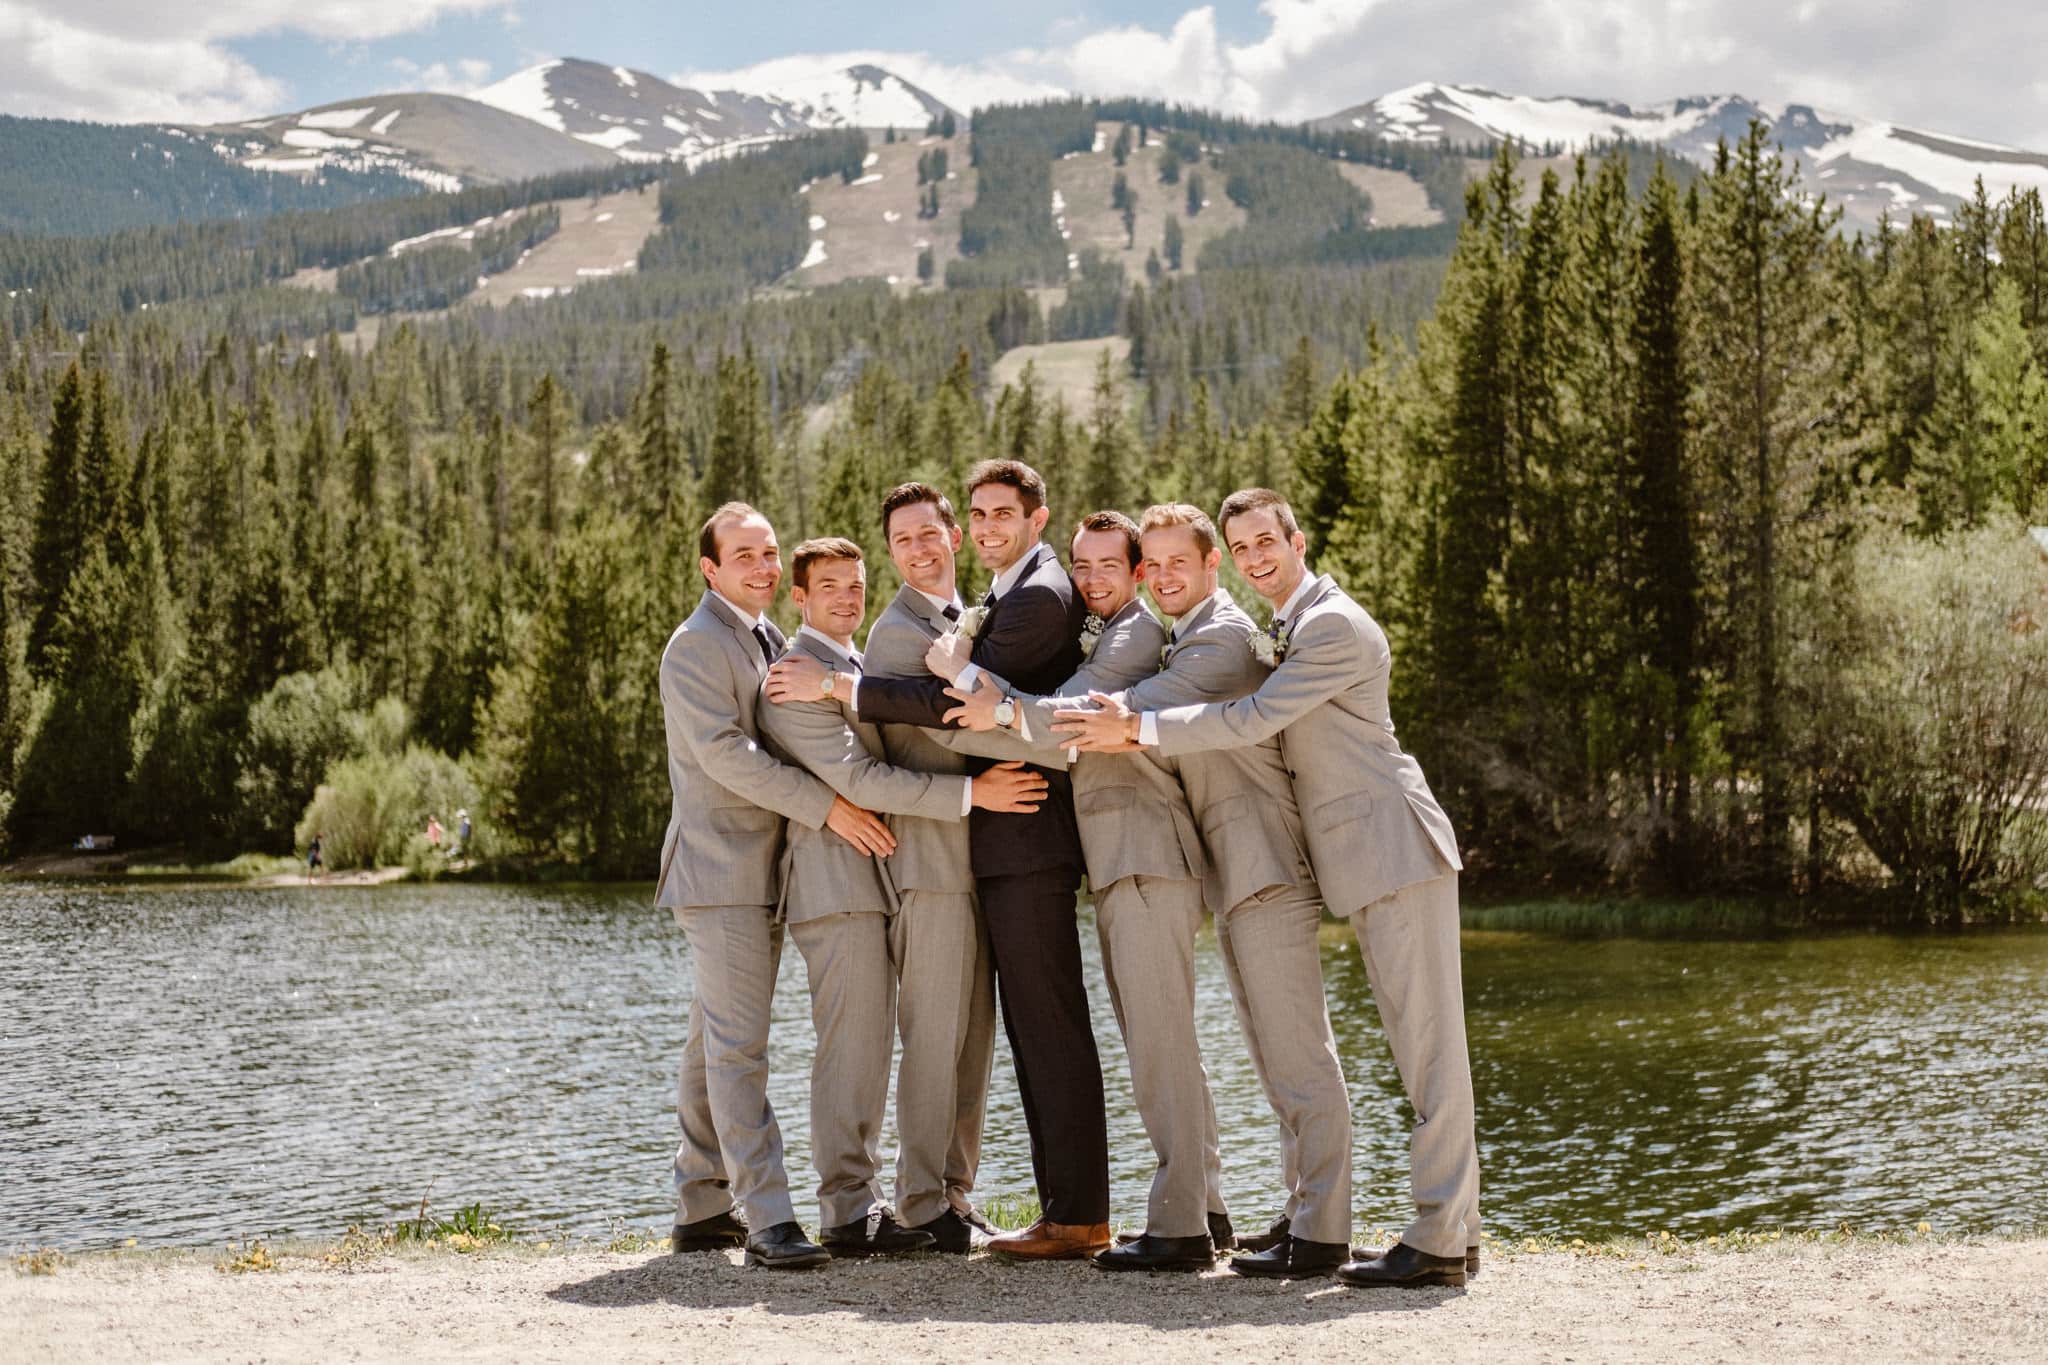 Groom in navy blue suit and groomsmen in light gray suits, wedding party photos, Breckenridge wedding photographer at Sawmill Reservoir